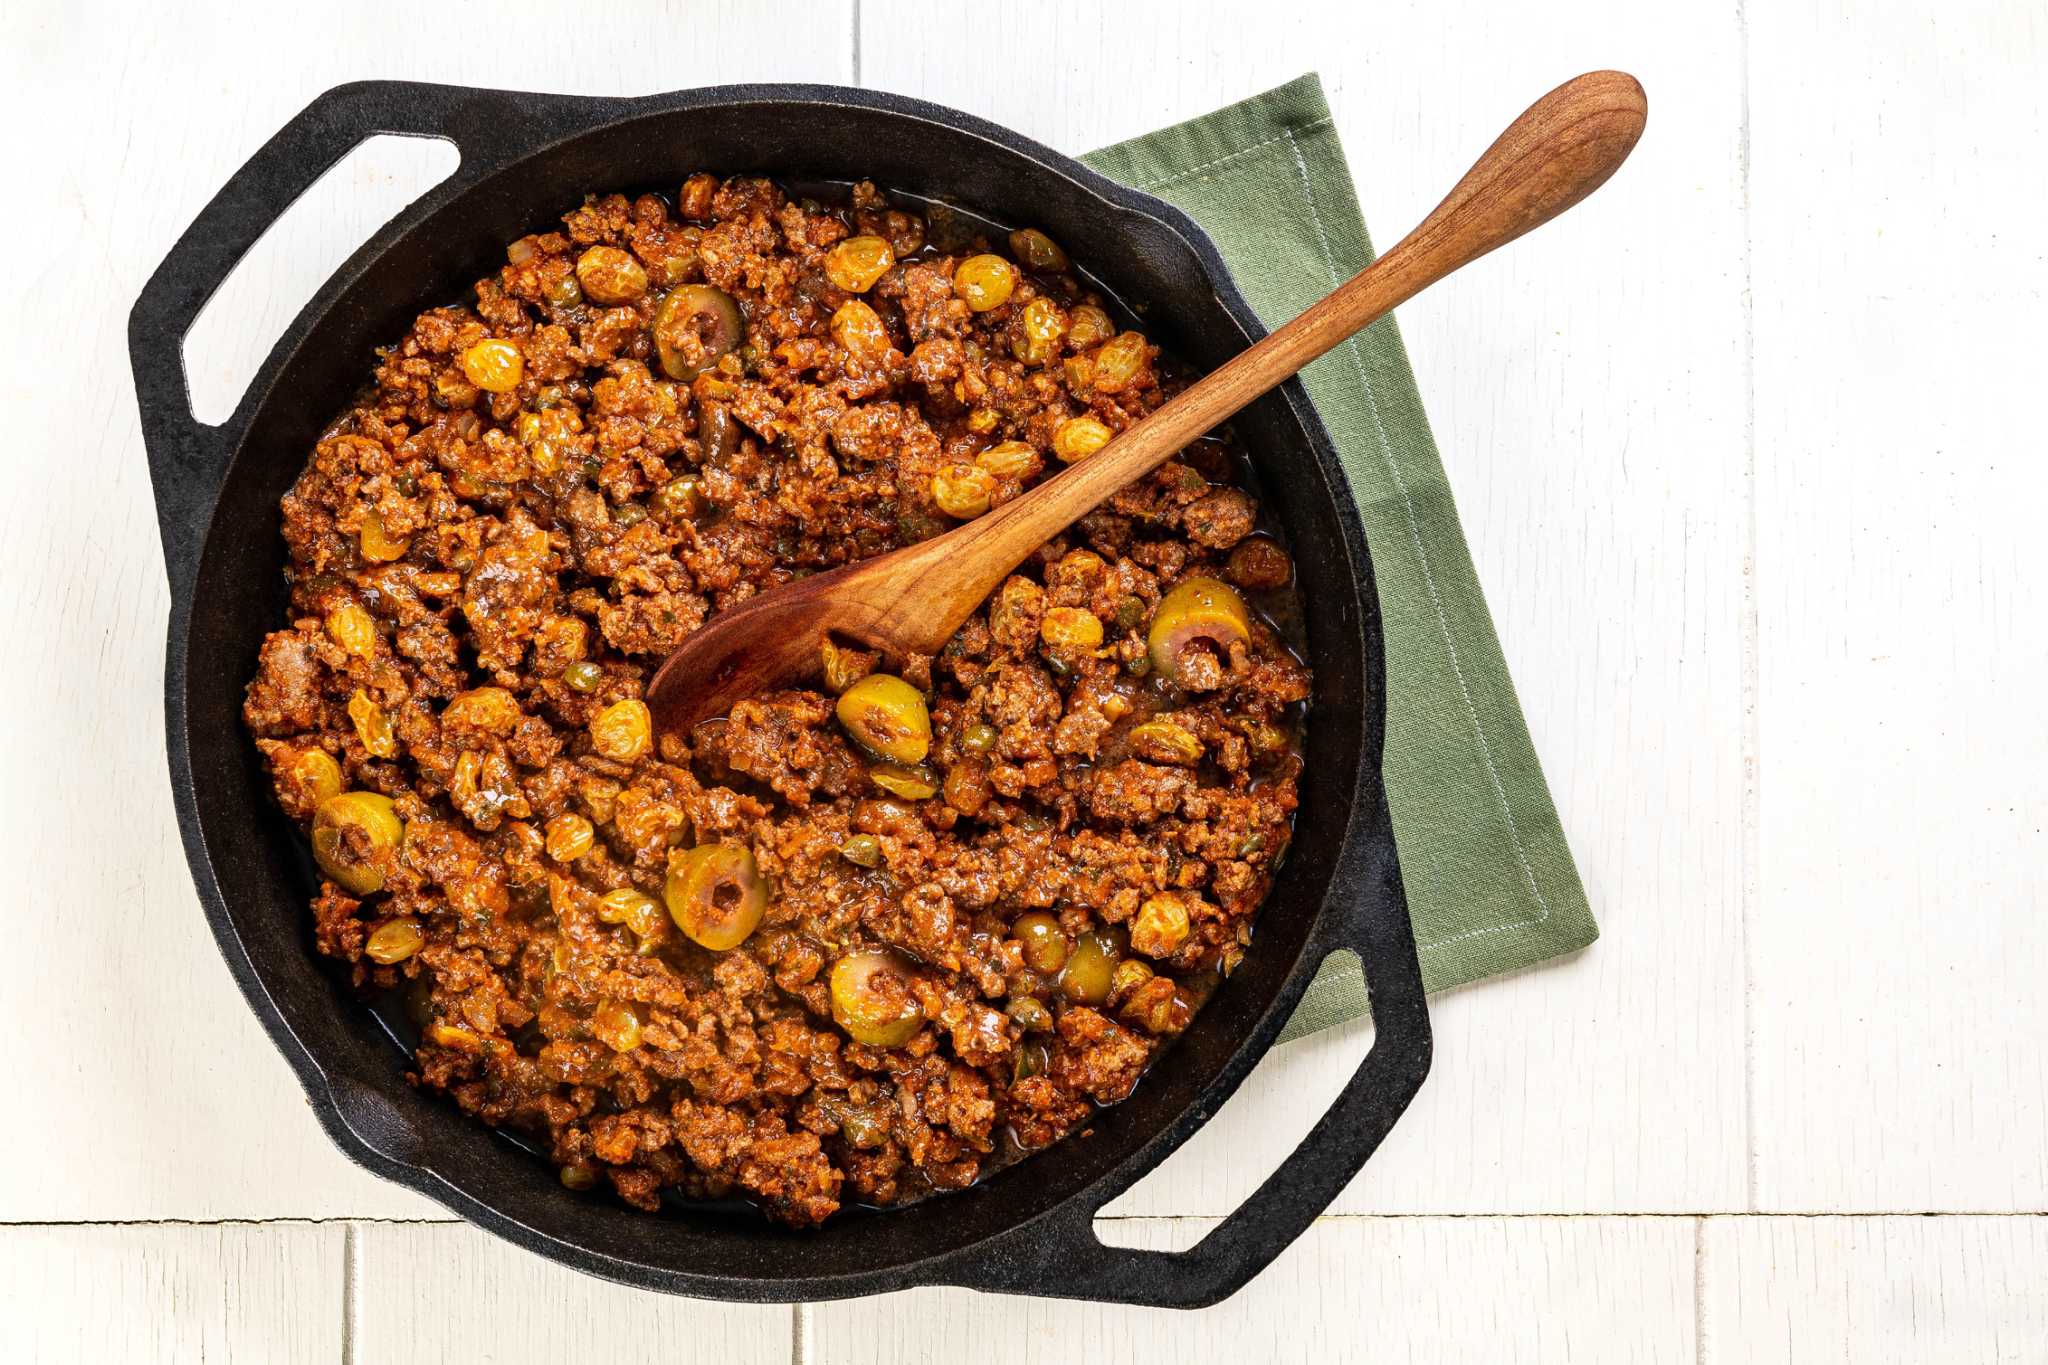 Mix in a little sweet into your savory picadillo